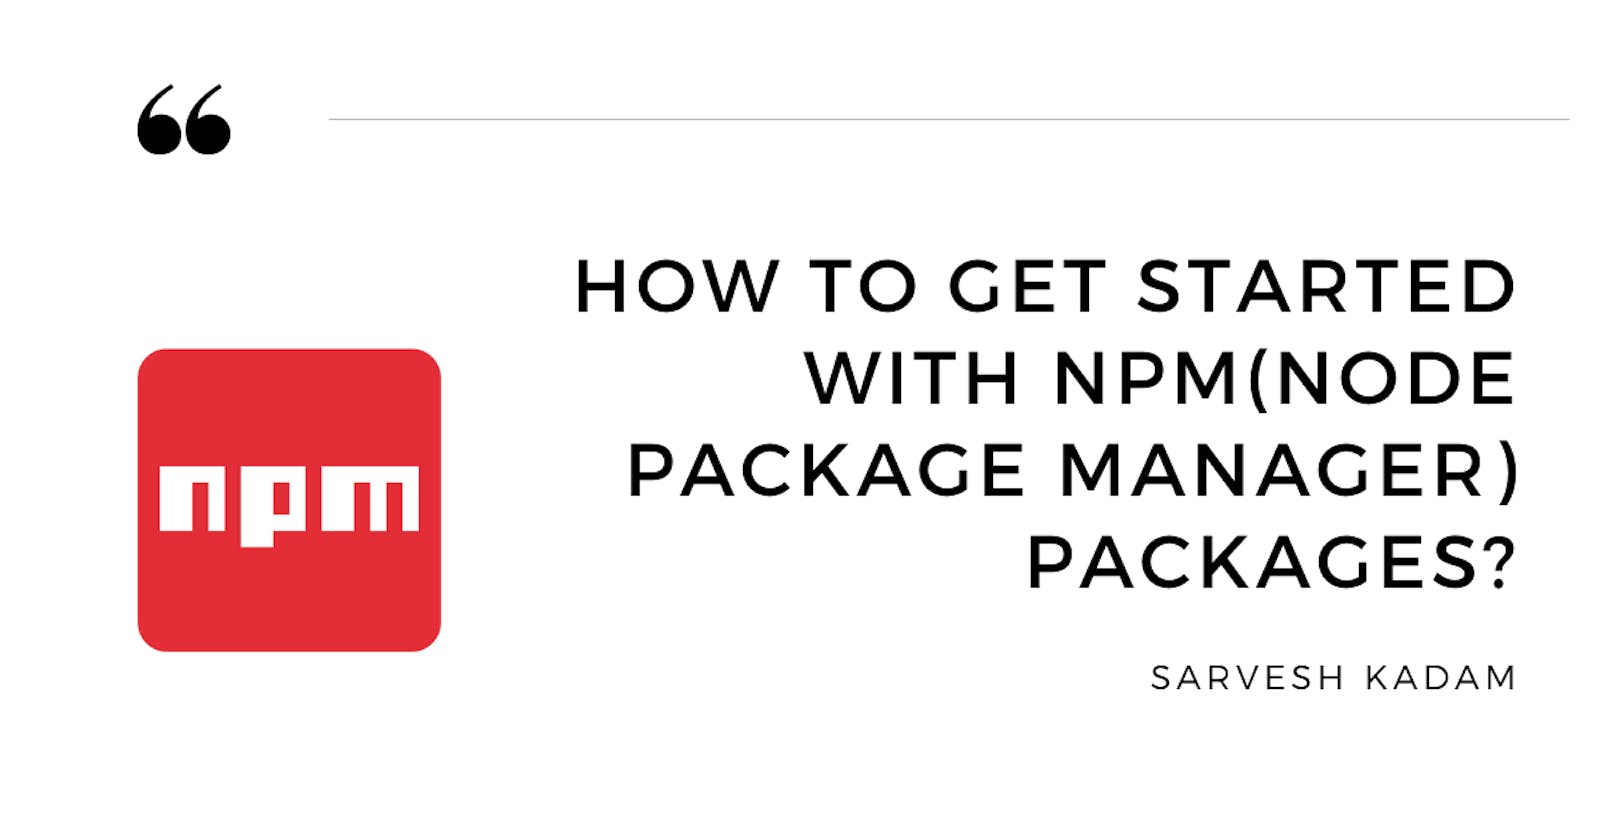 Getting started with NPM(Node Package Manager)